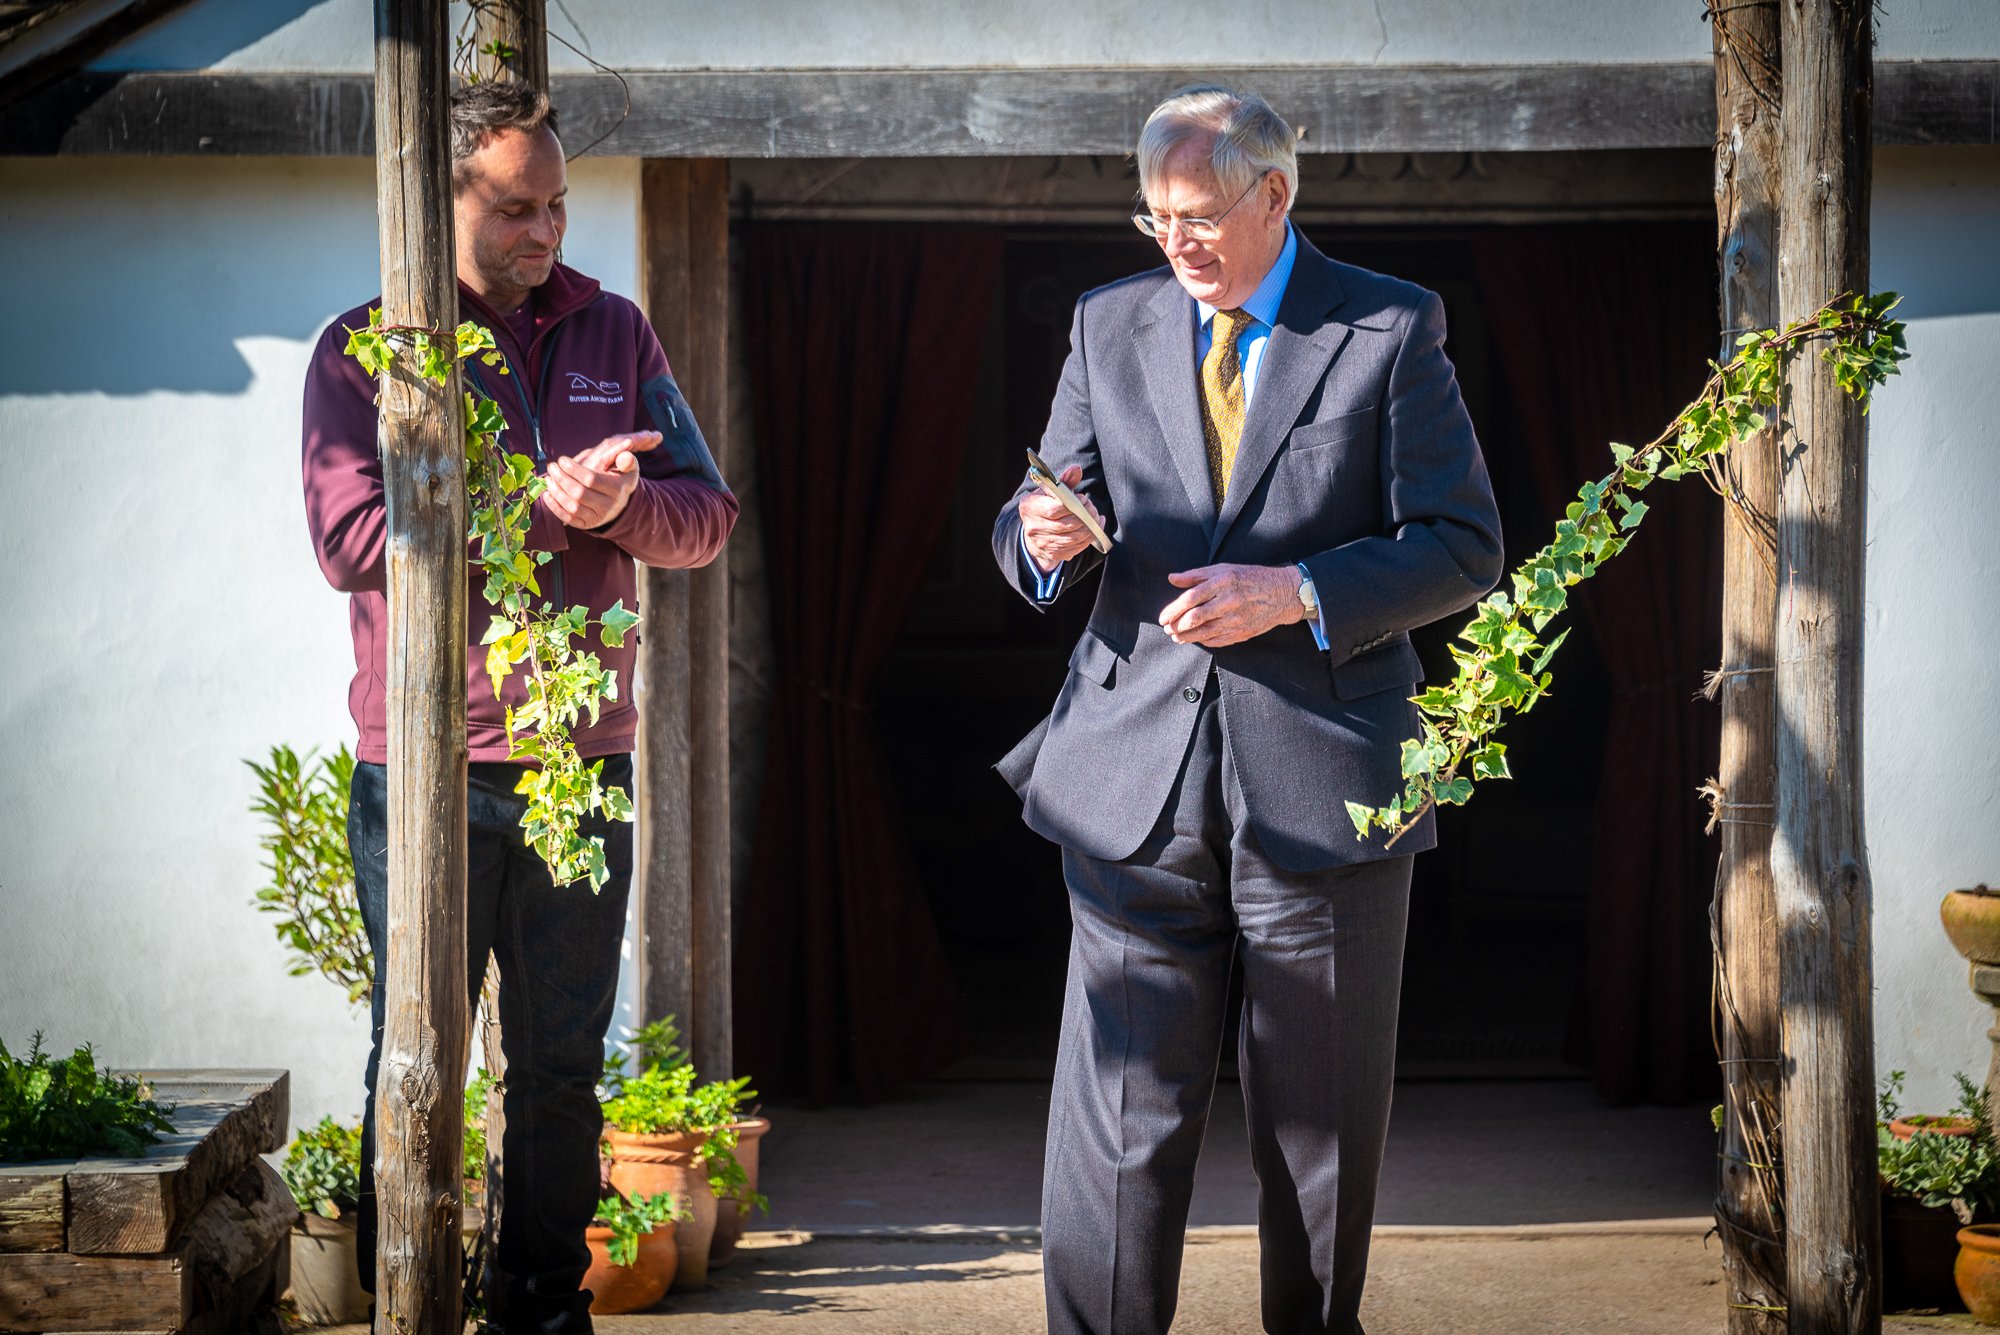 The Duke of Gloucester cuts the ivy garland